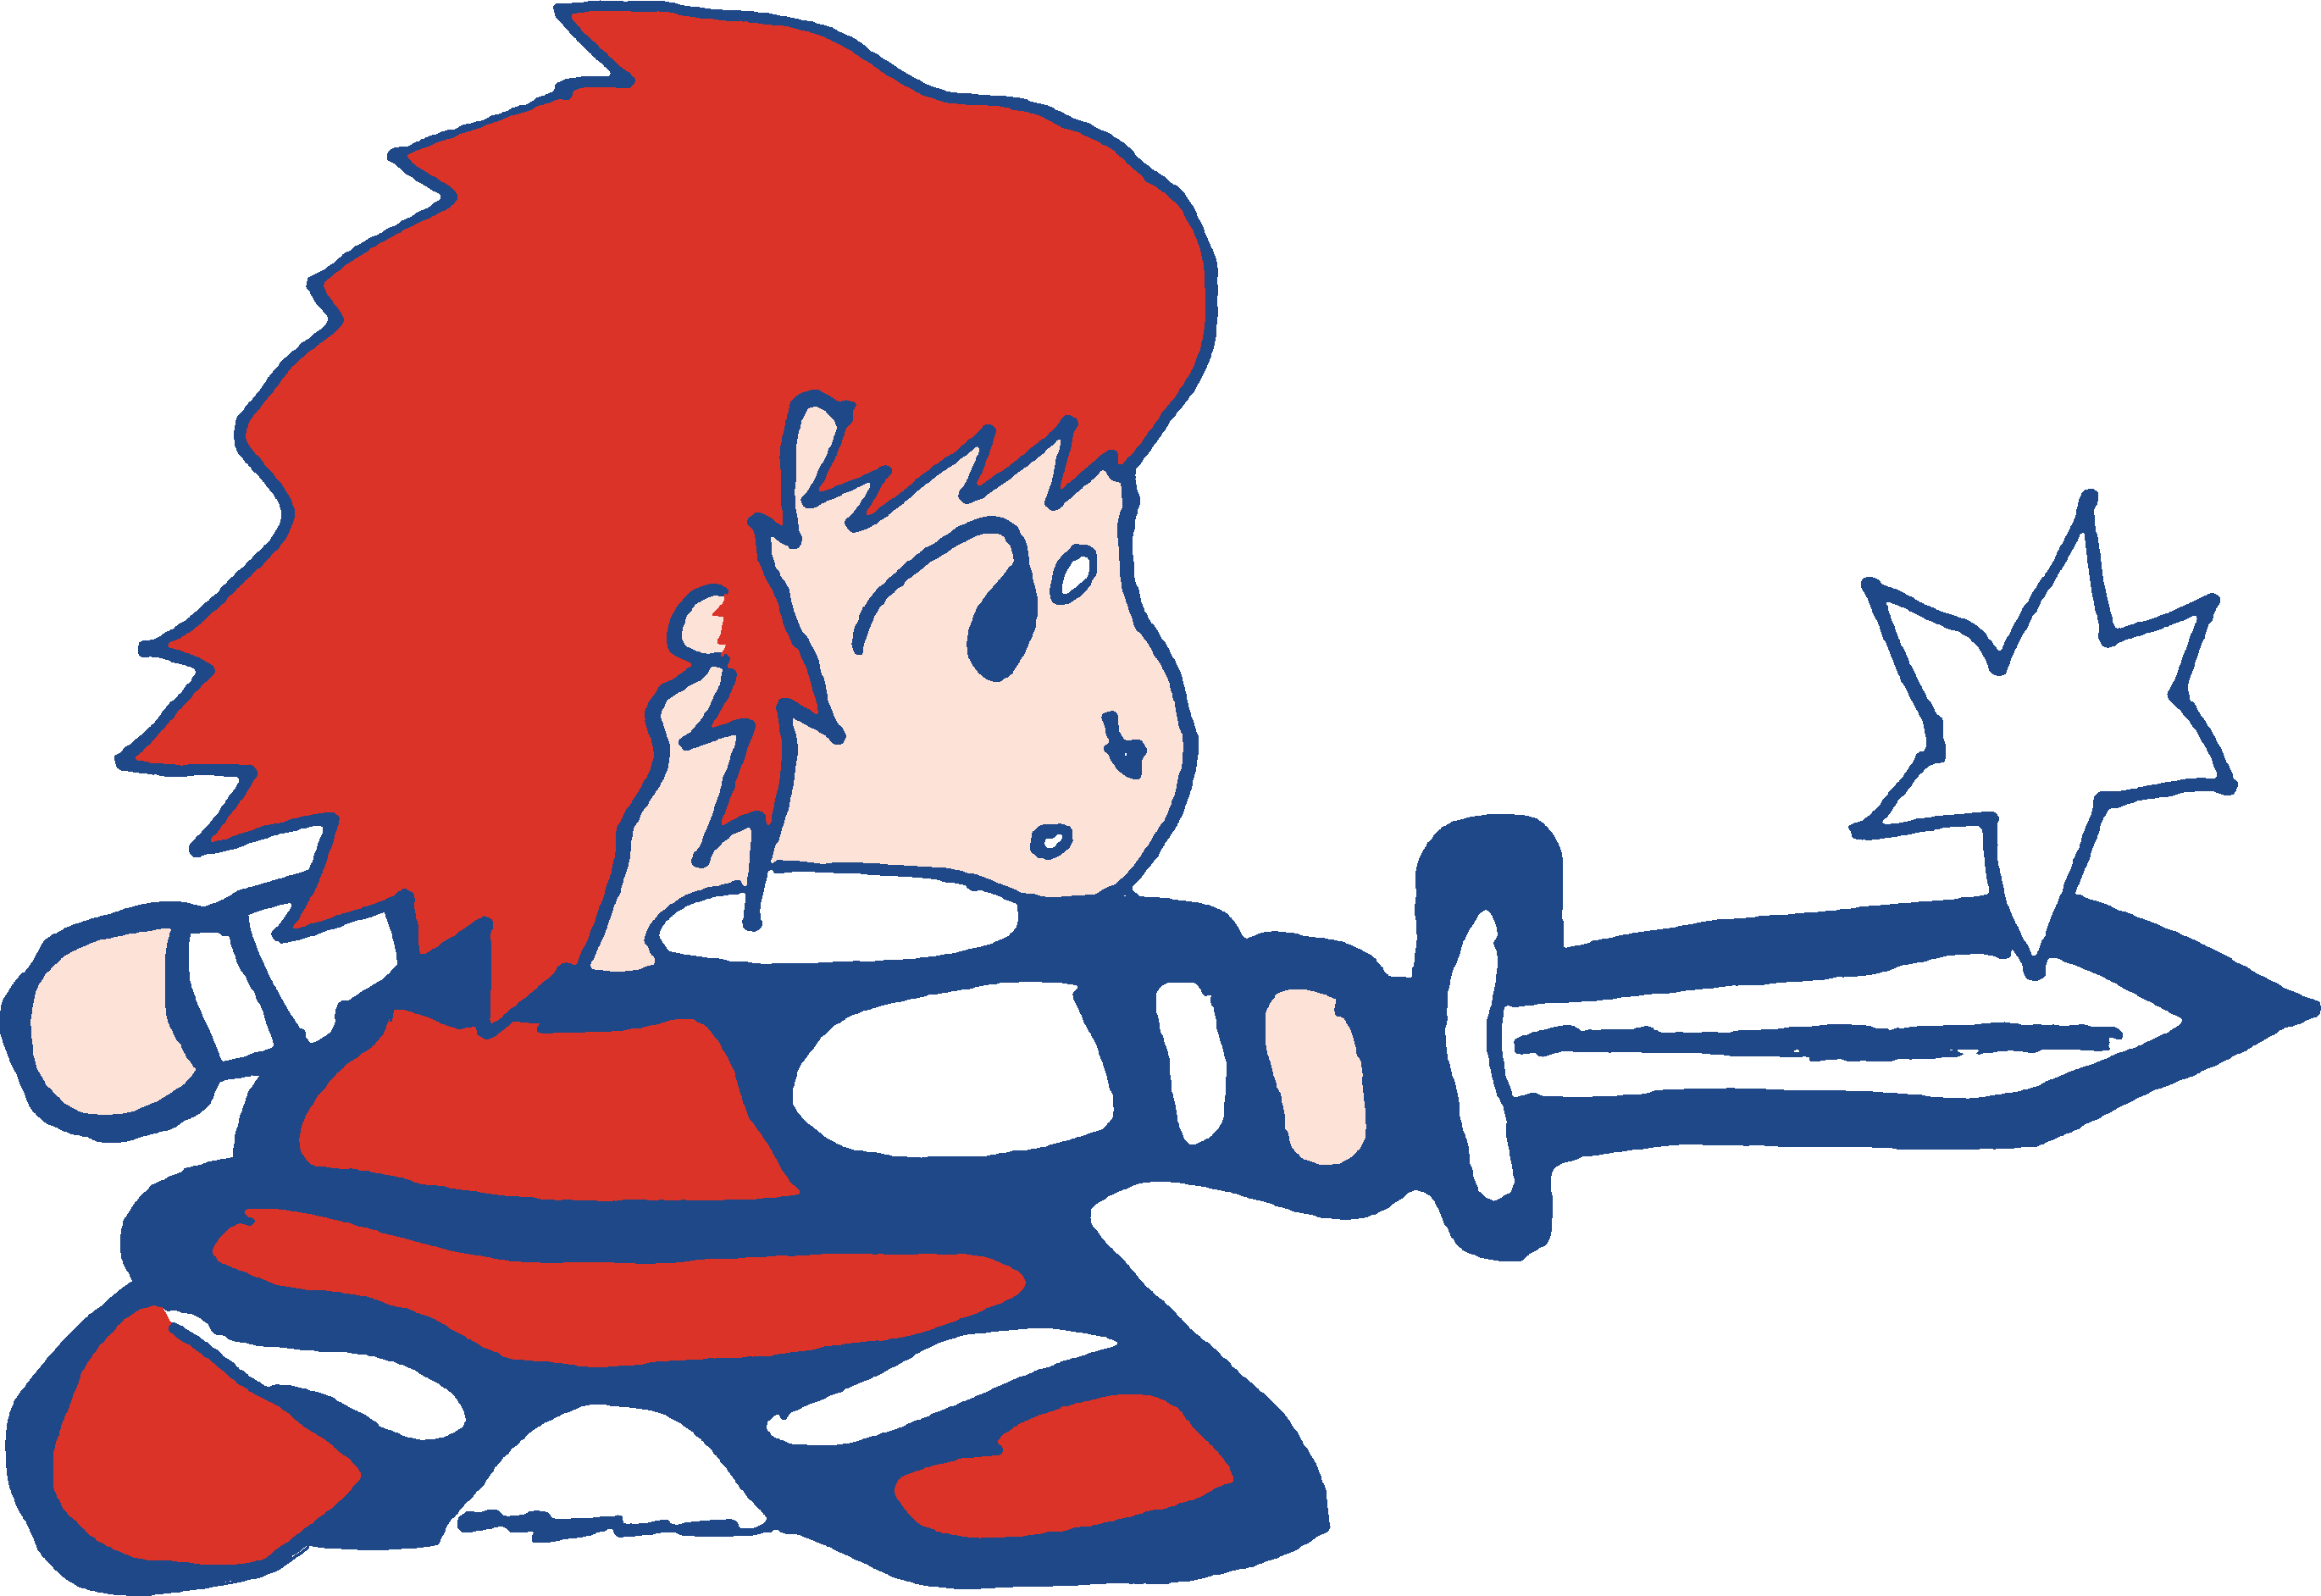 ruby as the hero from dragon quest drawn in the style of akira toriyama, swinging a sword